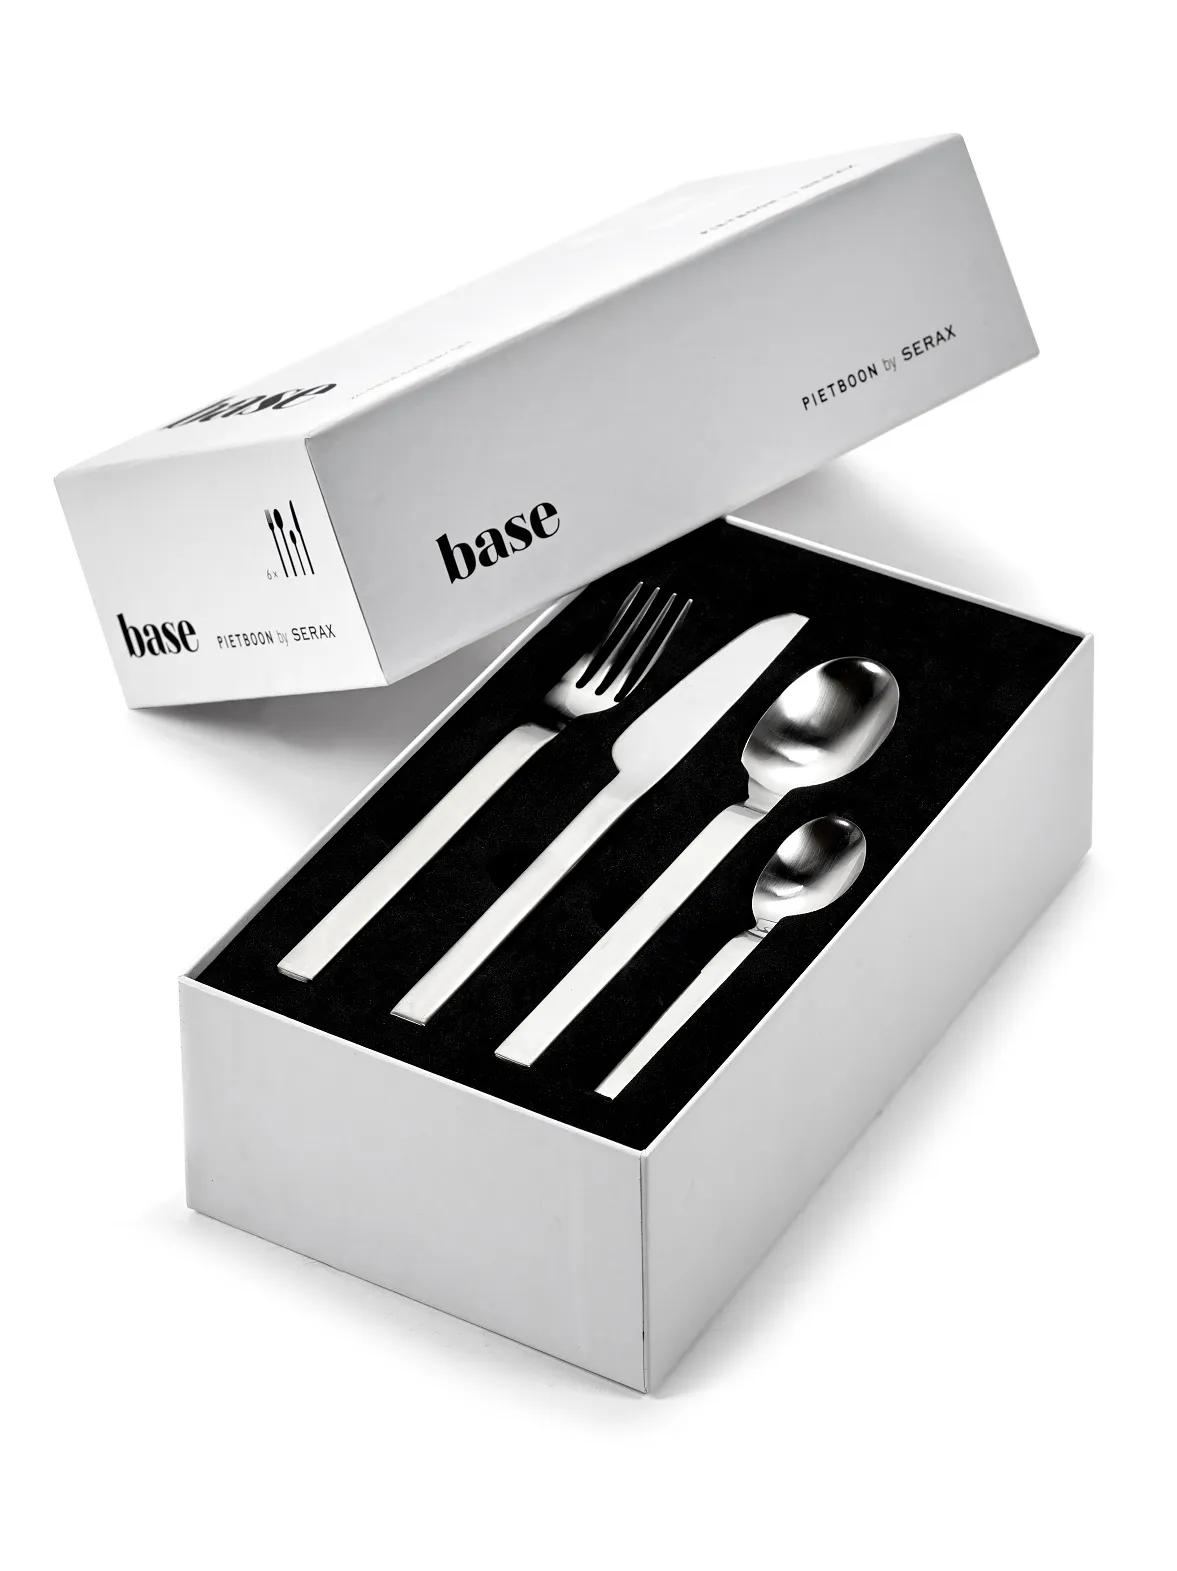 Set 24 pieces Serax Stainless Steel Cutlery Set Base Collection Gift Box